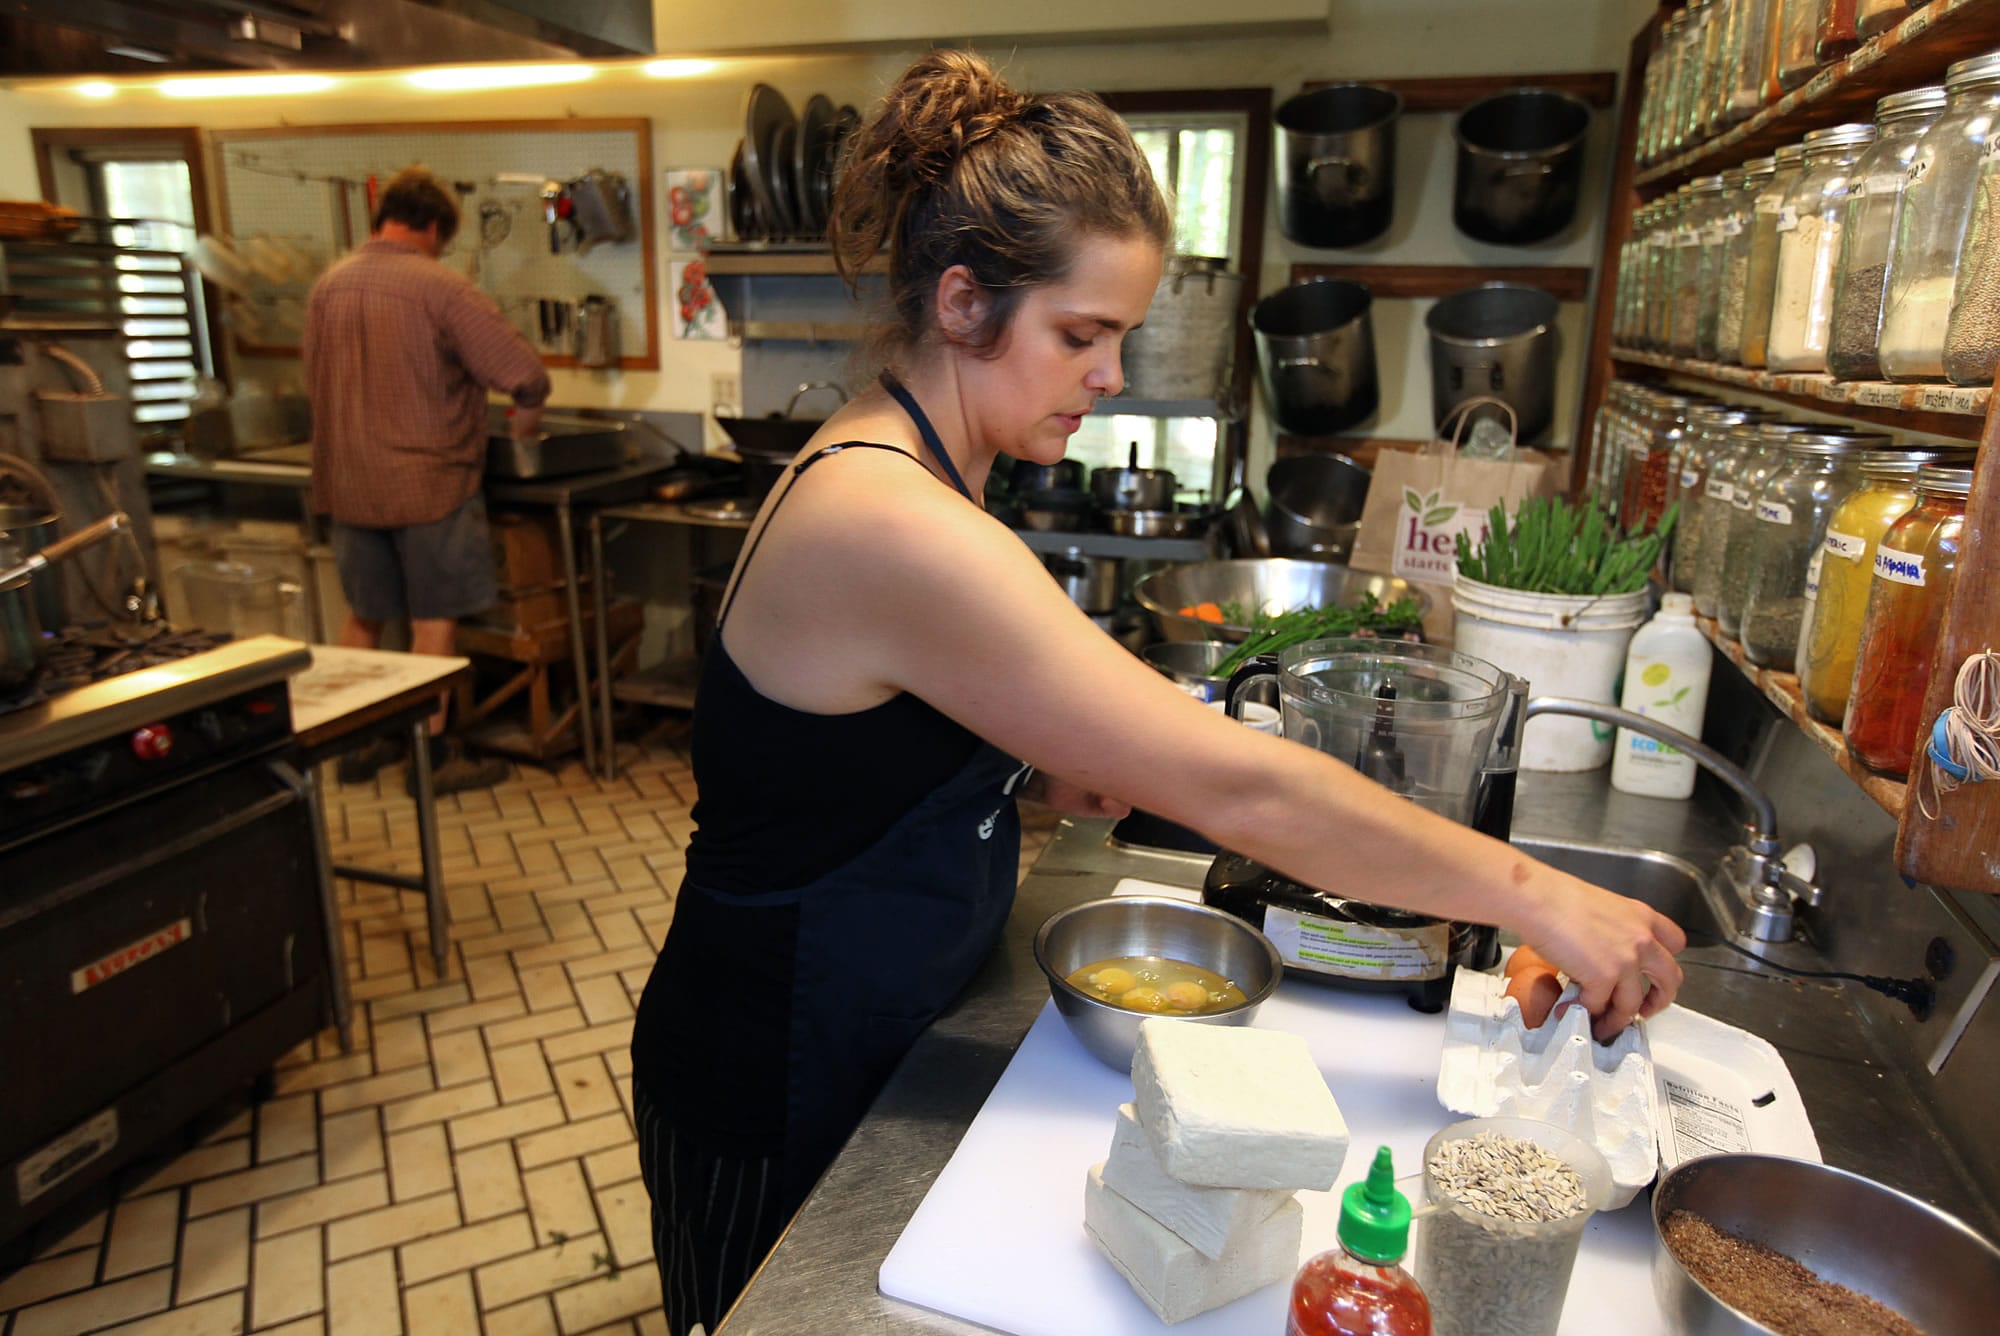 Carly Rodgers gathers ingredients for tofu burgers, on the dinner menu at Twin Oaks Community in Virginia.